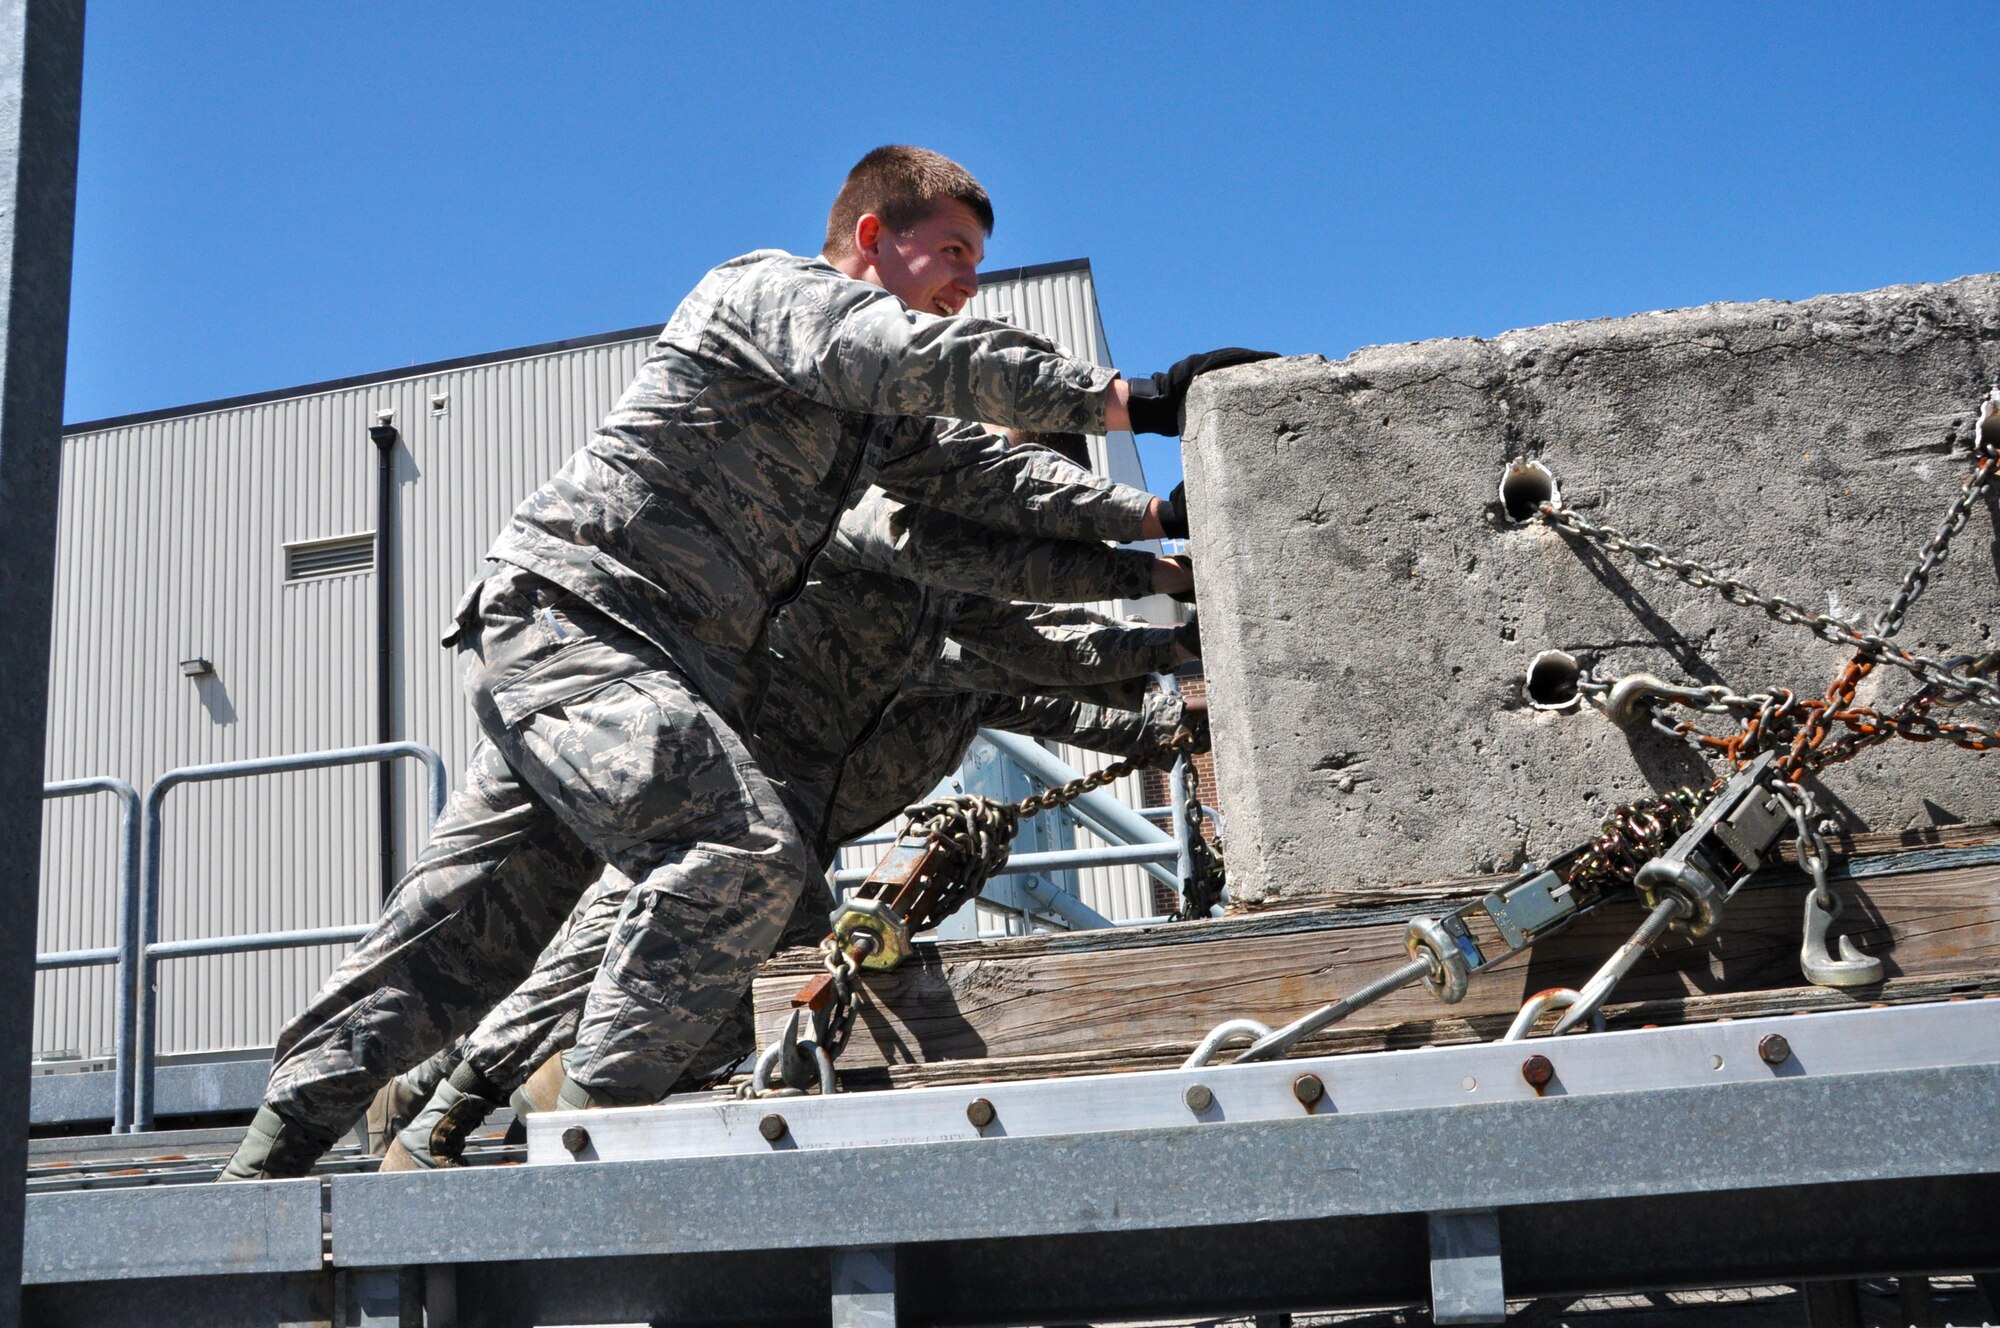 Senior Airman Daniel Carpenter, 80th Aerial Port Squadron air transportation journeyman, works alongside other Airmen to move a large, heavy pallet April 3, 2016 at Dobbins Air Reserve Base. Carpenter recently received the news of his acceptance into the USAFA, military academy for officer candidates for the U.S. Air Force. (U.S. Air Force photo by Senior Airman Lauren Douglas)